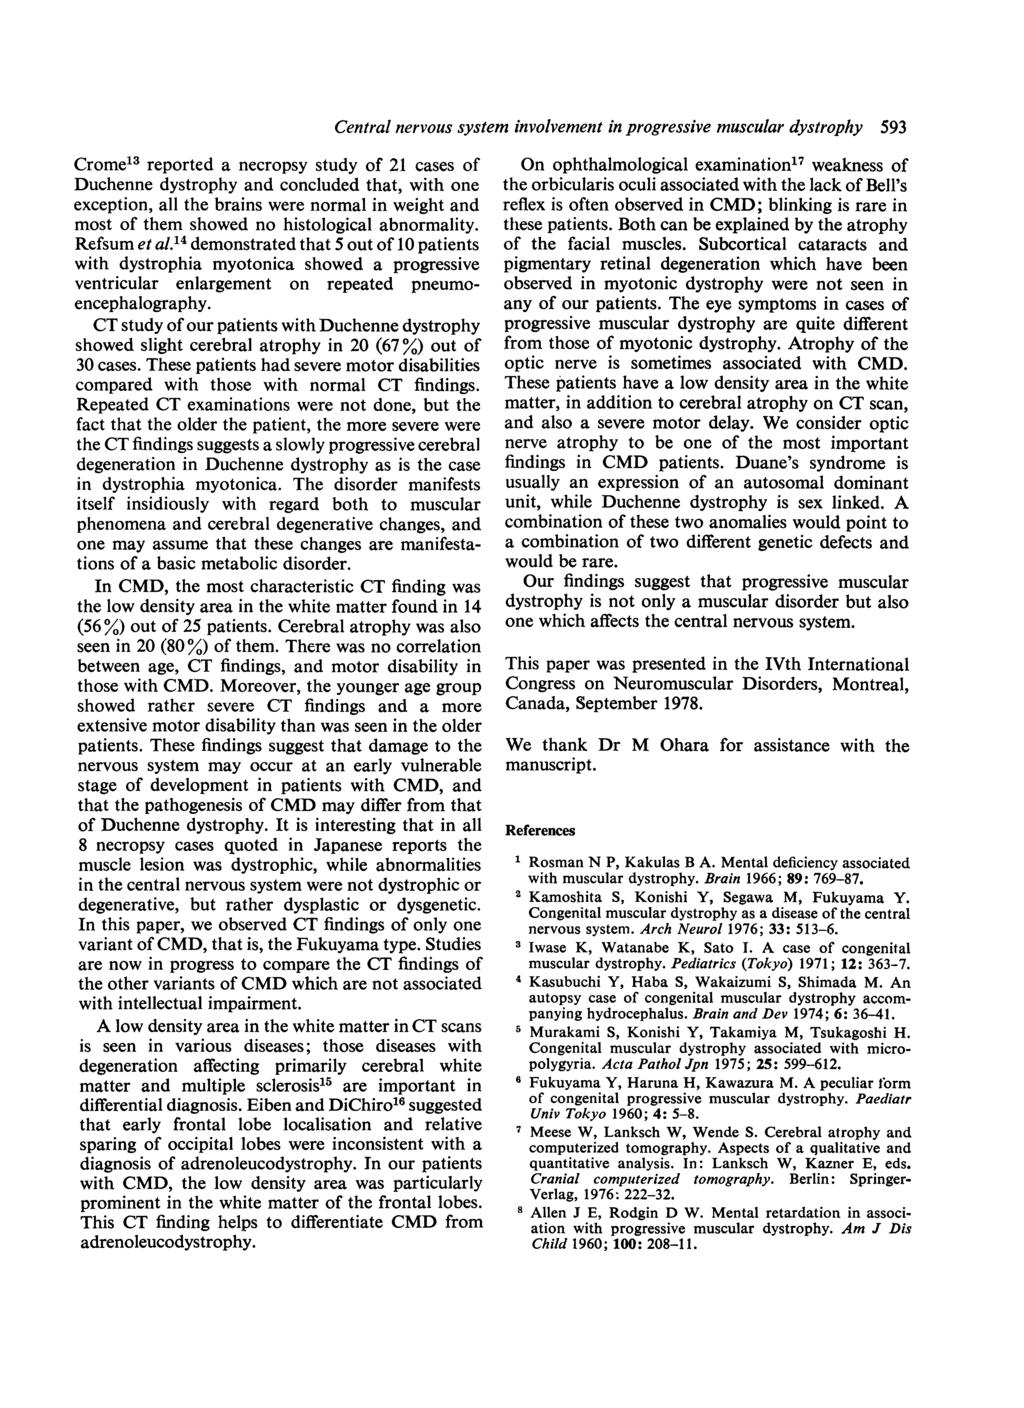 Crome13 reported a necropsy study of 21 cases of Duchenne dystrophy and concluded that, with one exception, all the brains were normal in weight and most of them showed no histological abnormality.